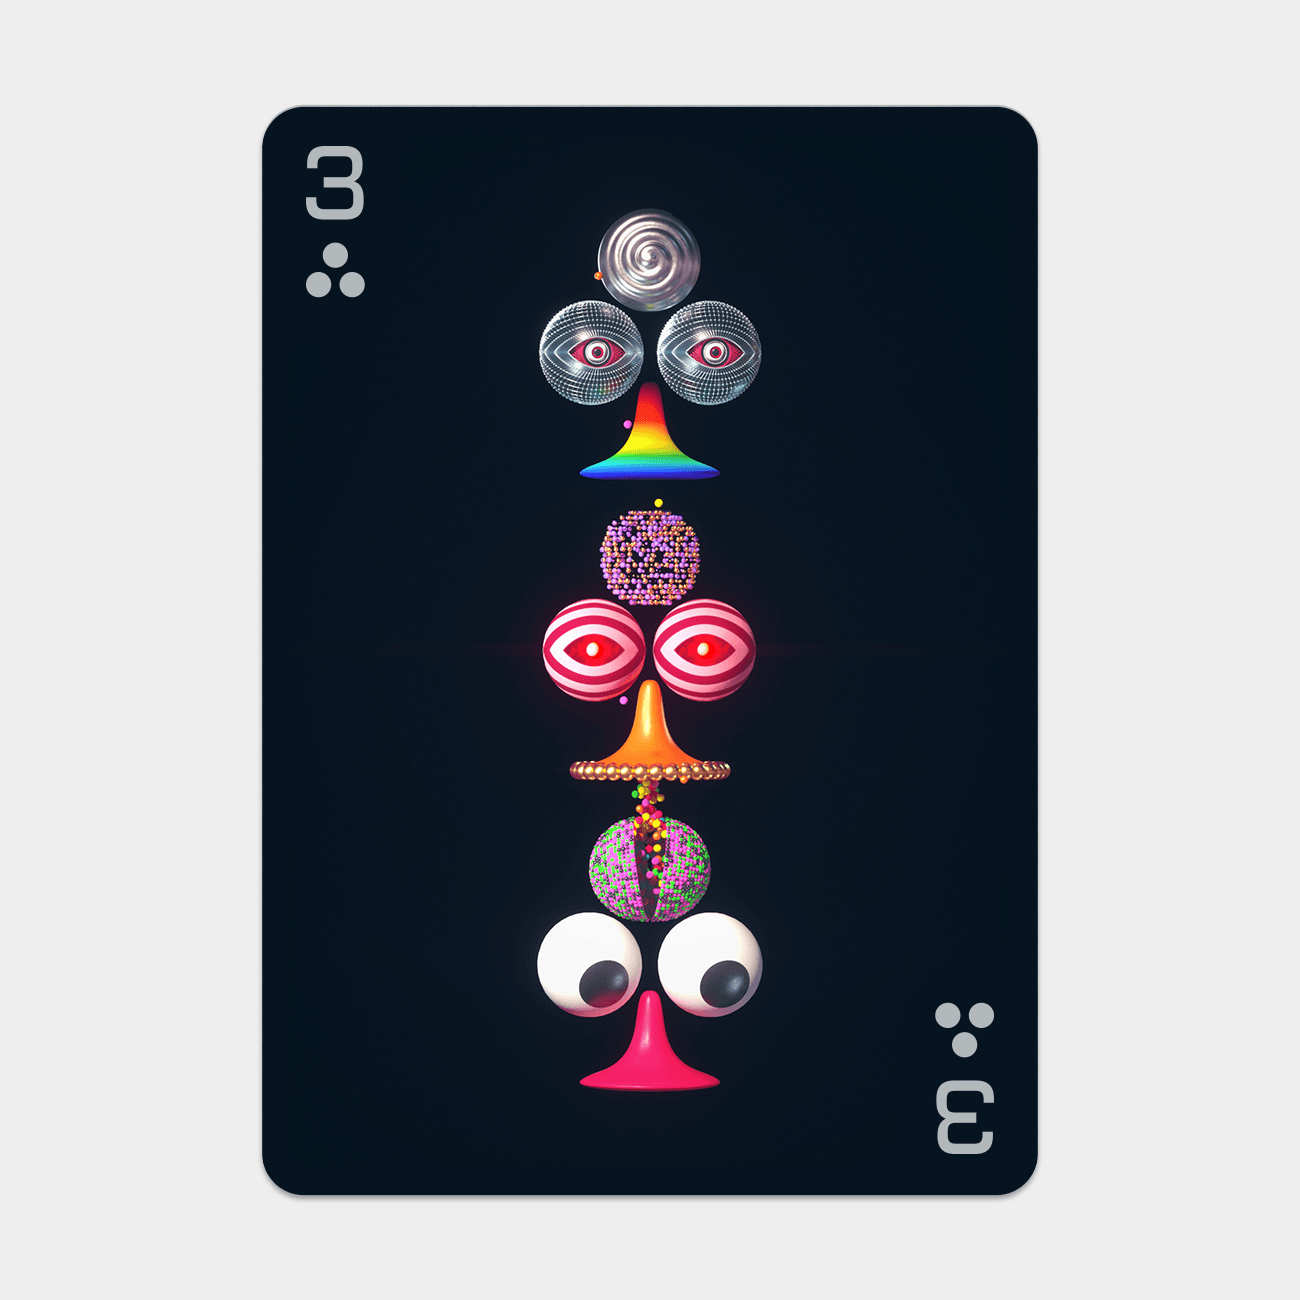 3 of Clubs